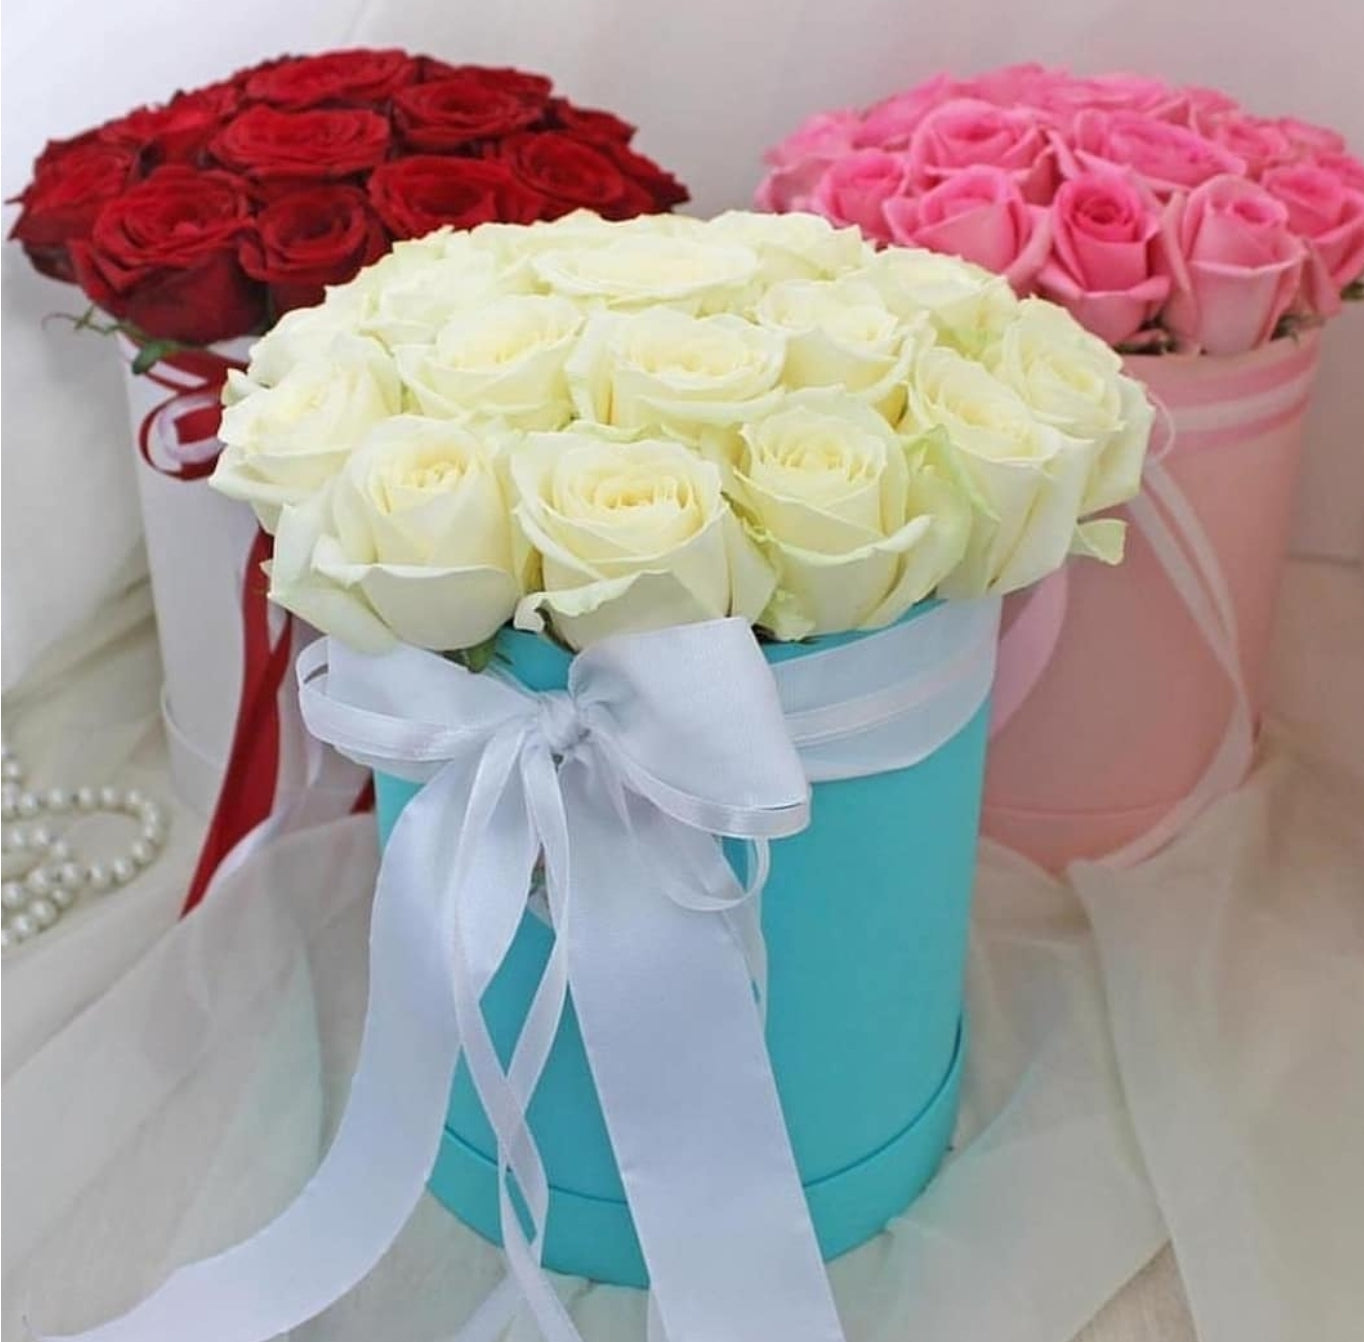 "Palette of Emotions: Hat Box of Roses in Various Sizes and Colors"